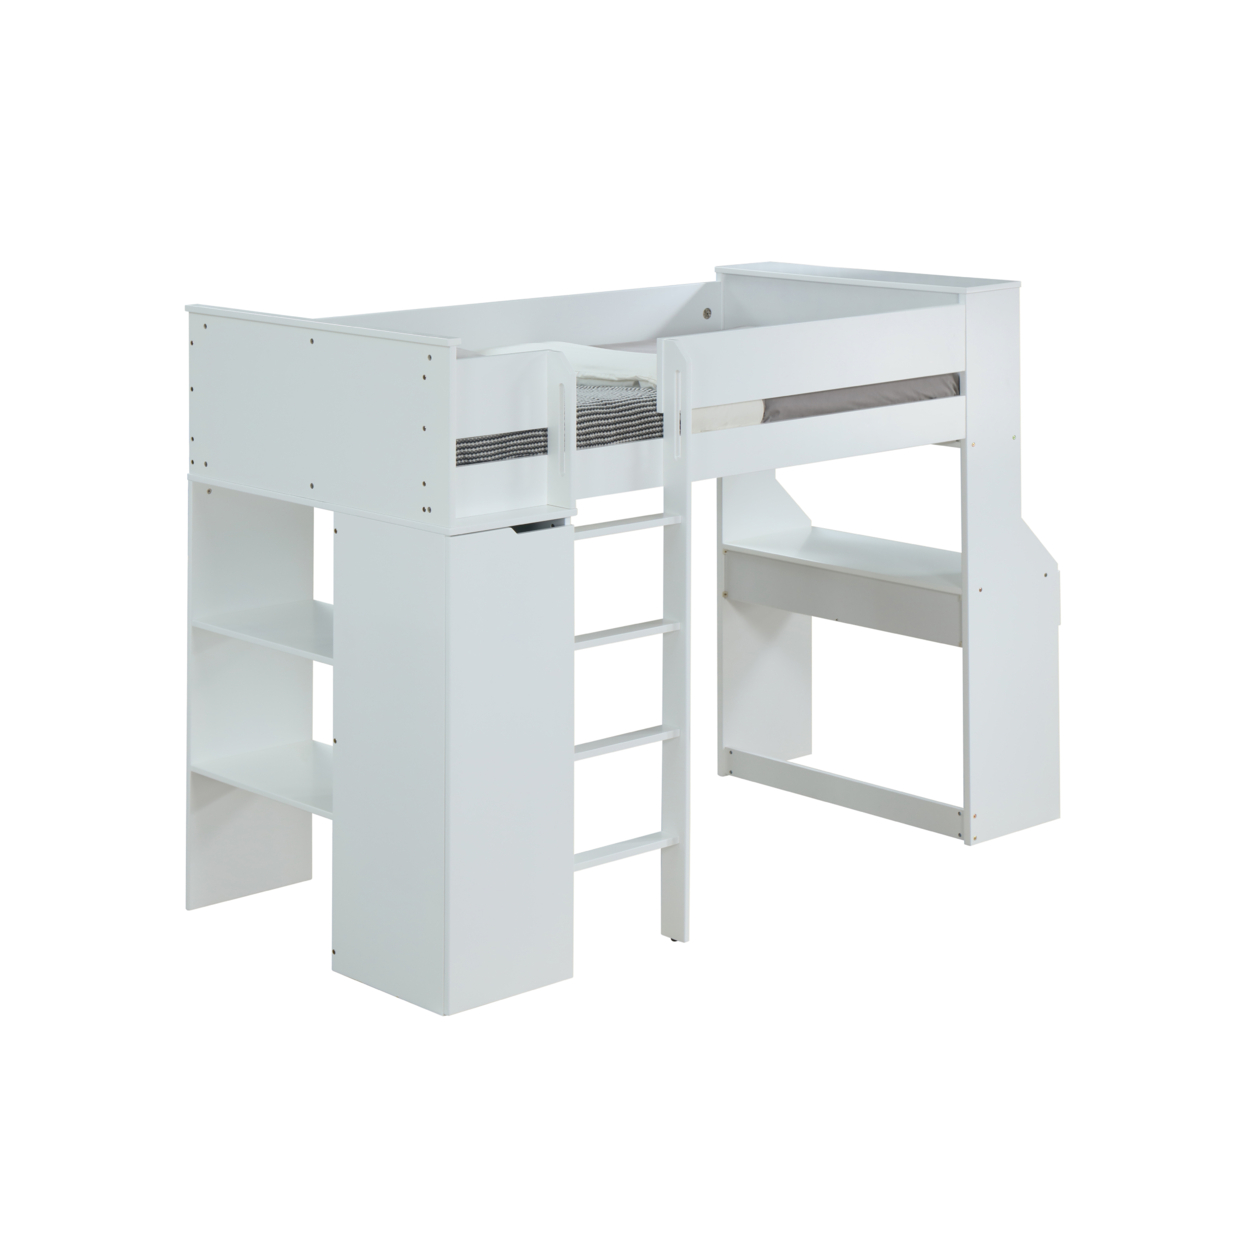 Wooden Twin Size Loft Bunk Bed With Workstation And Ladder, White- Saltoro Sherpi